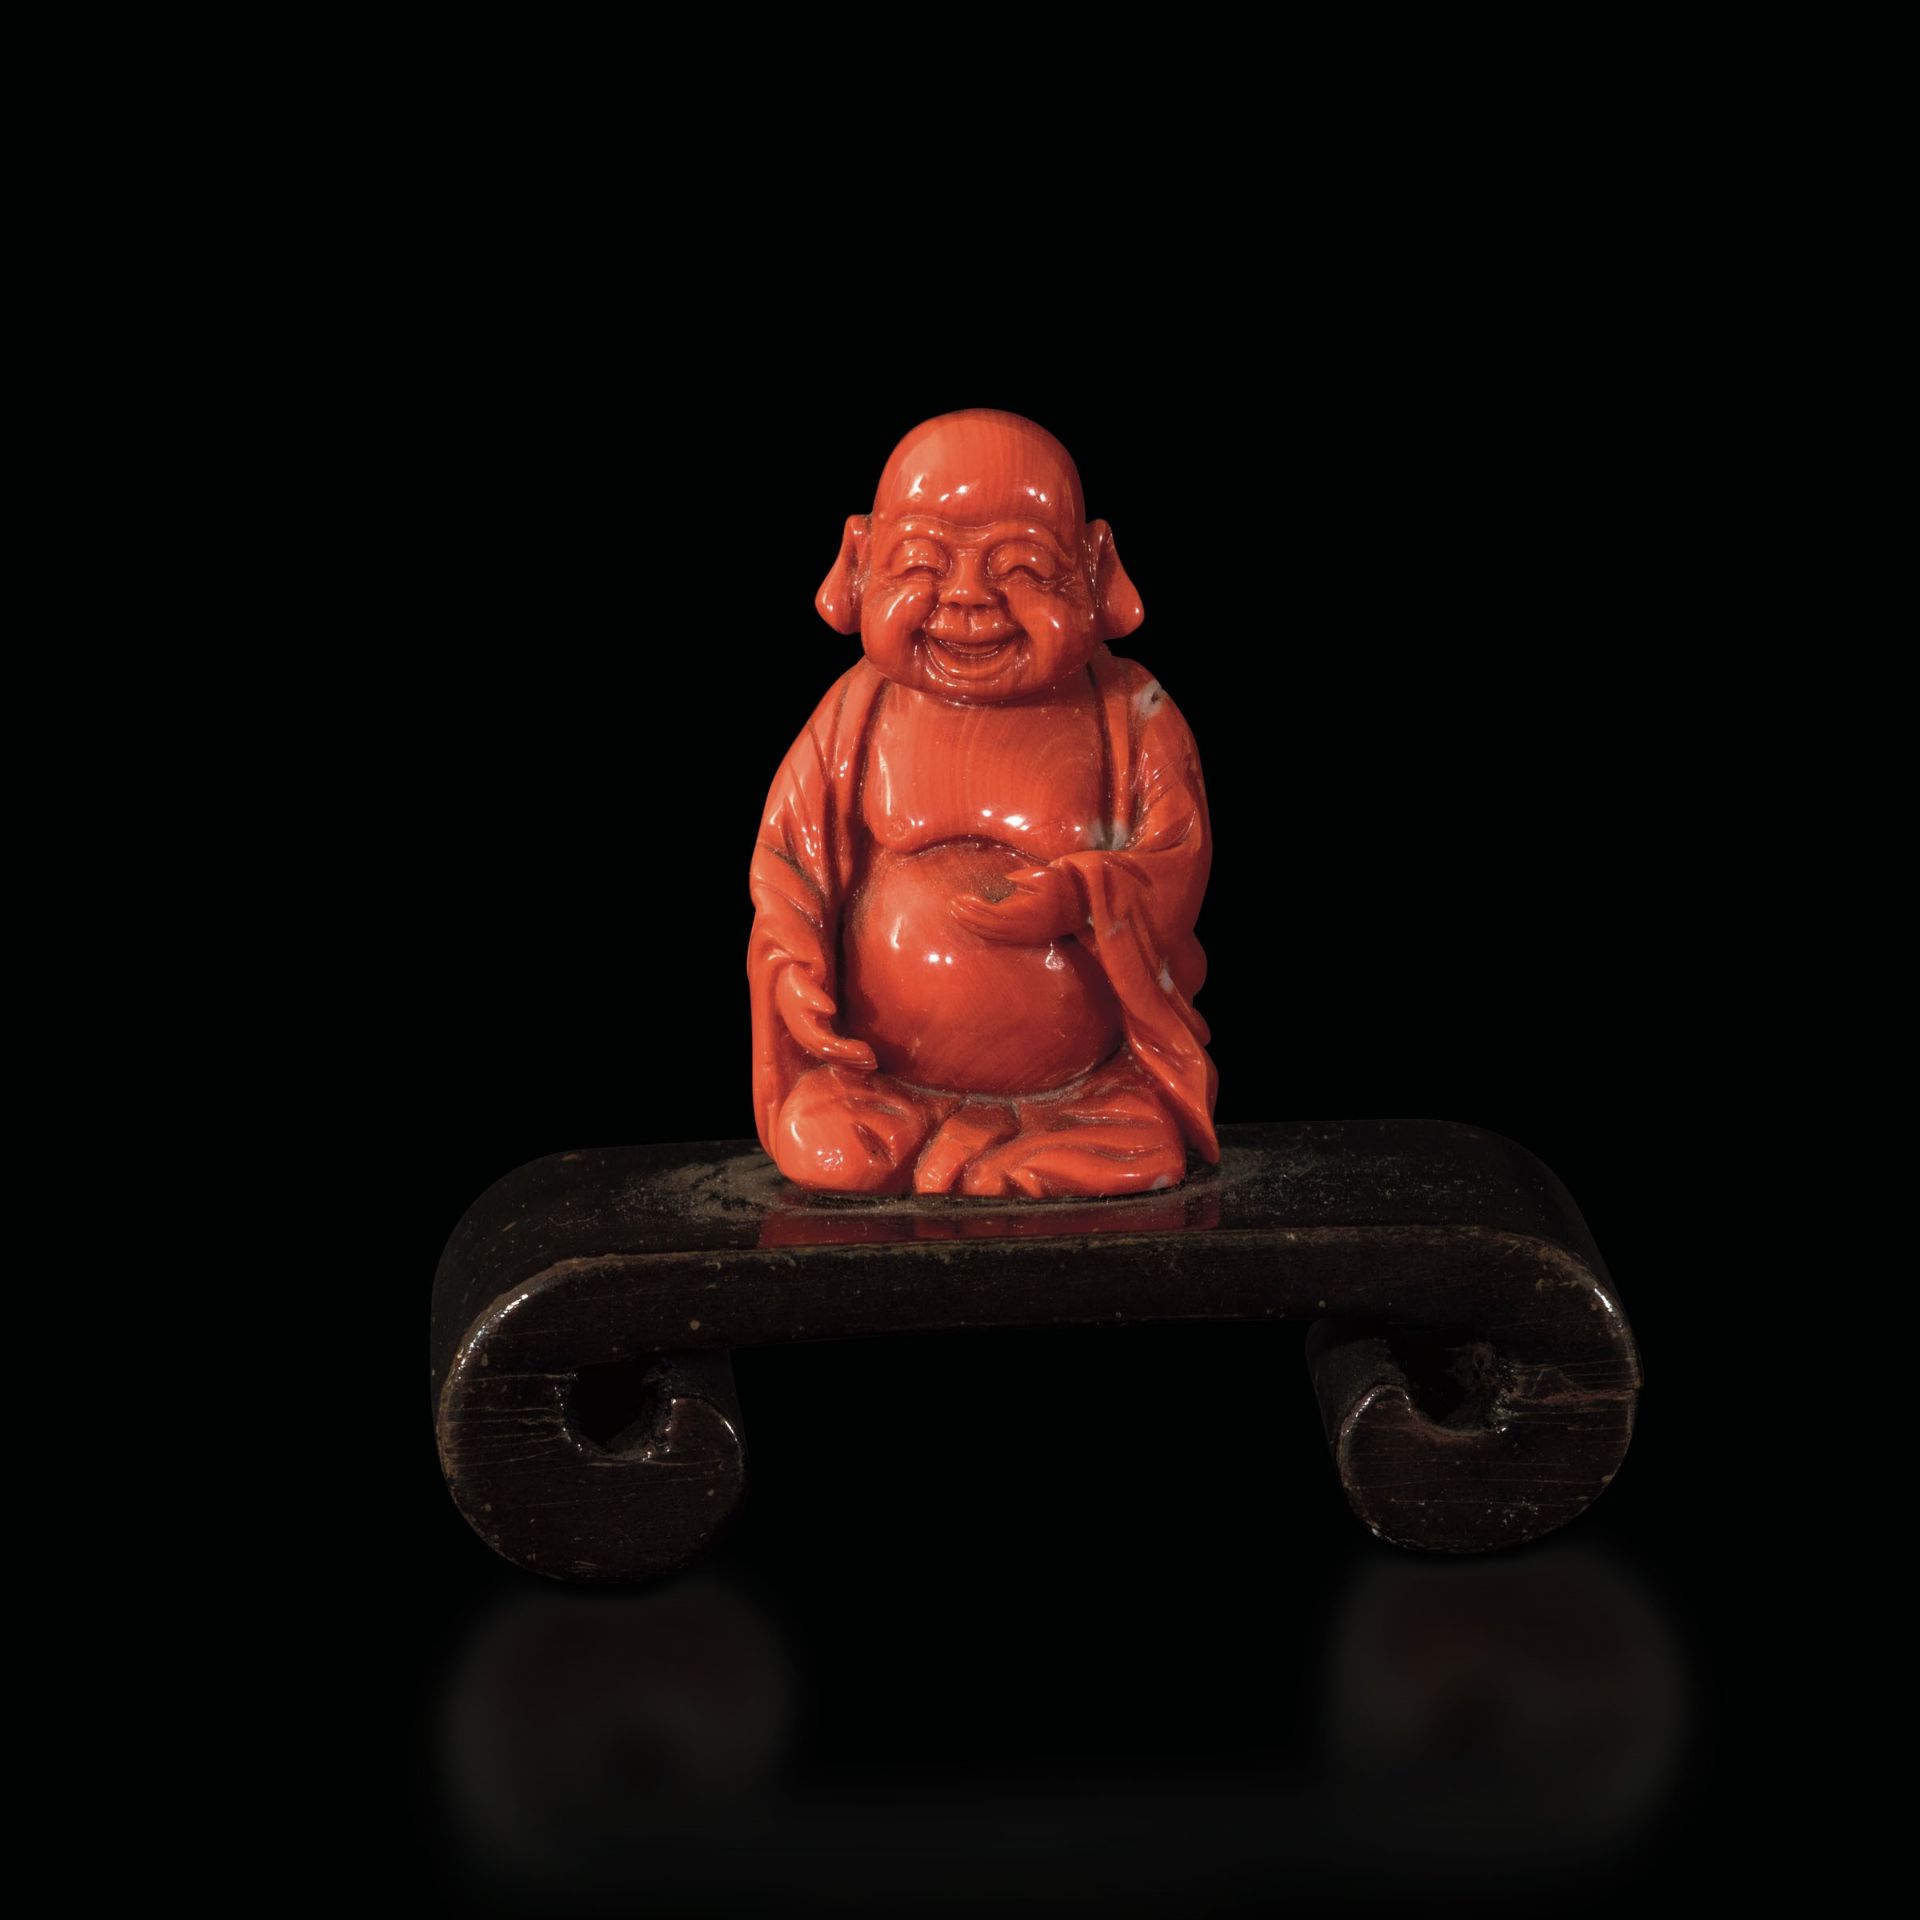 A small coral Budai, China, early 20th century - Gross weight 36gr; H 4.5cm -